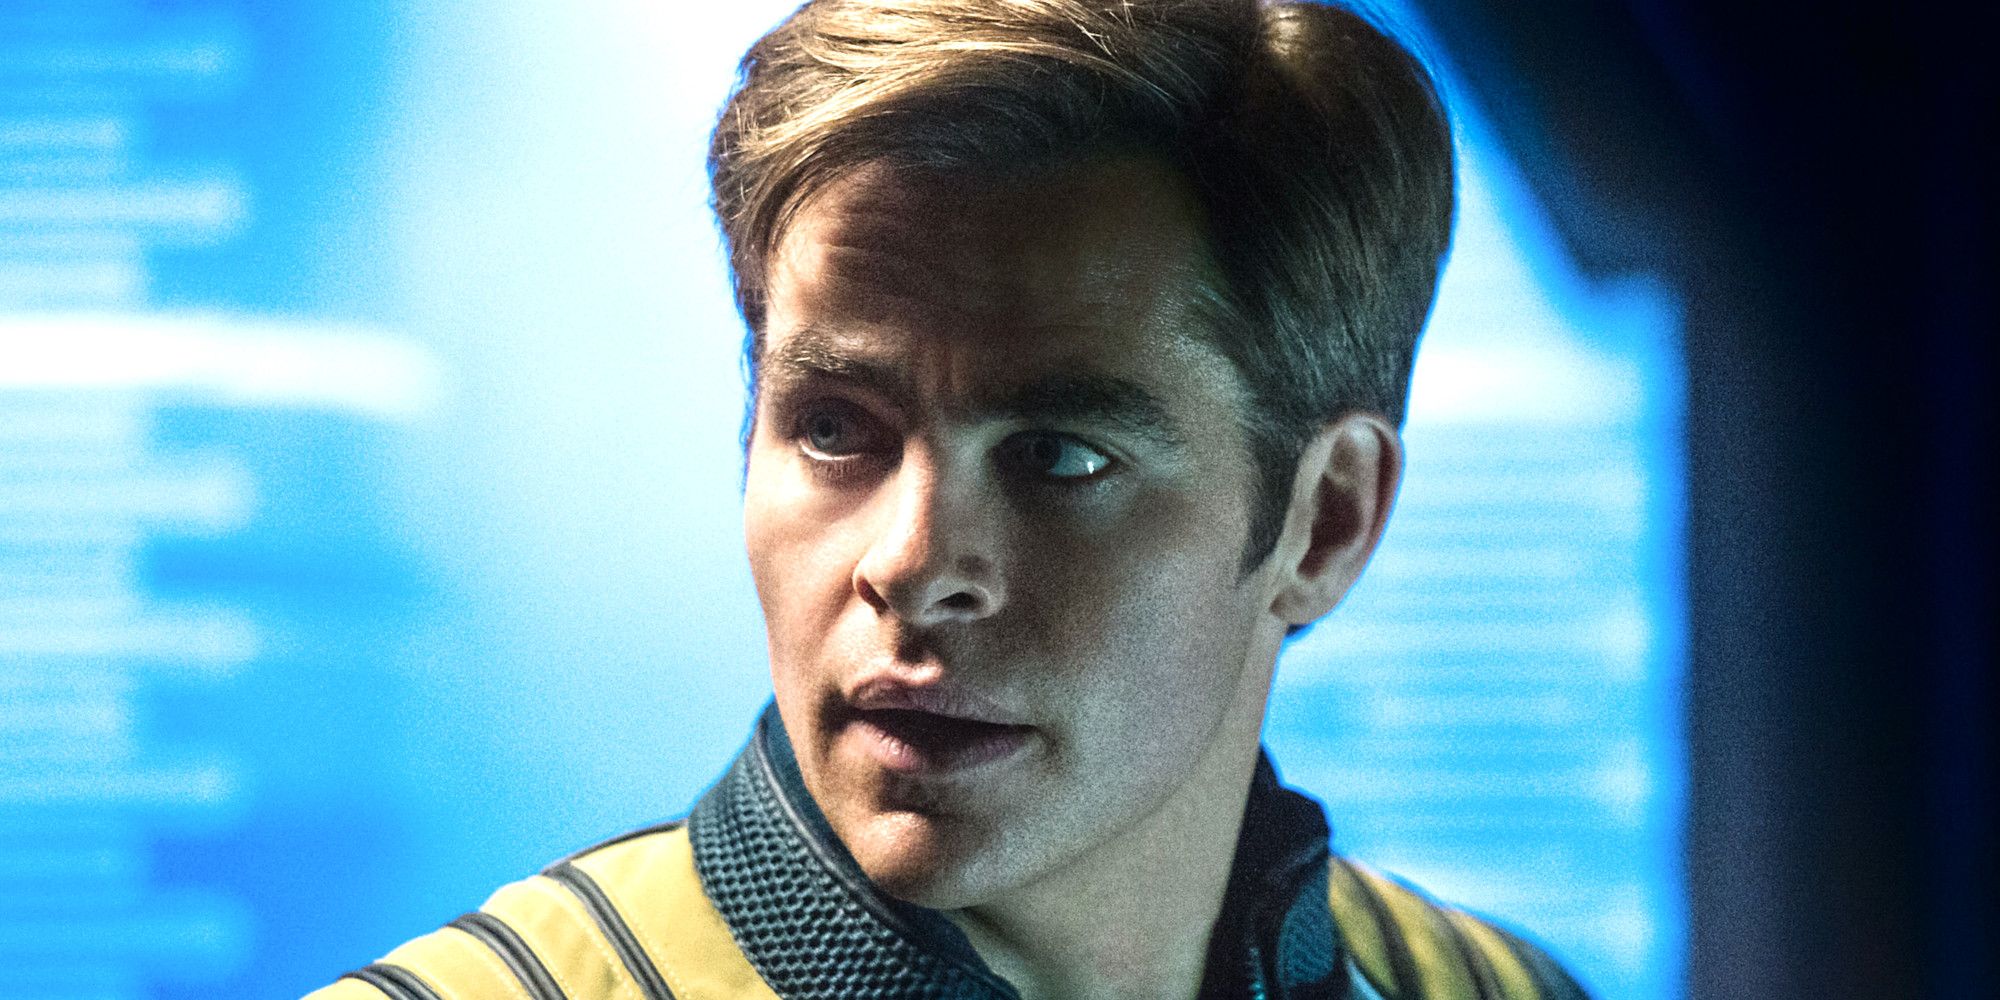 Star Trek 4 Gets Promising Production Update From Paramount Boss